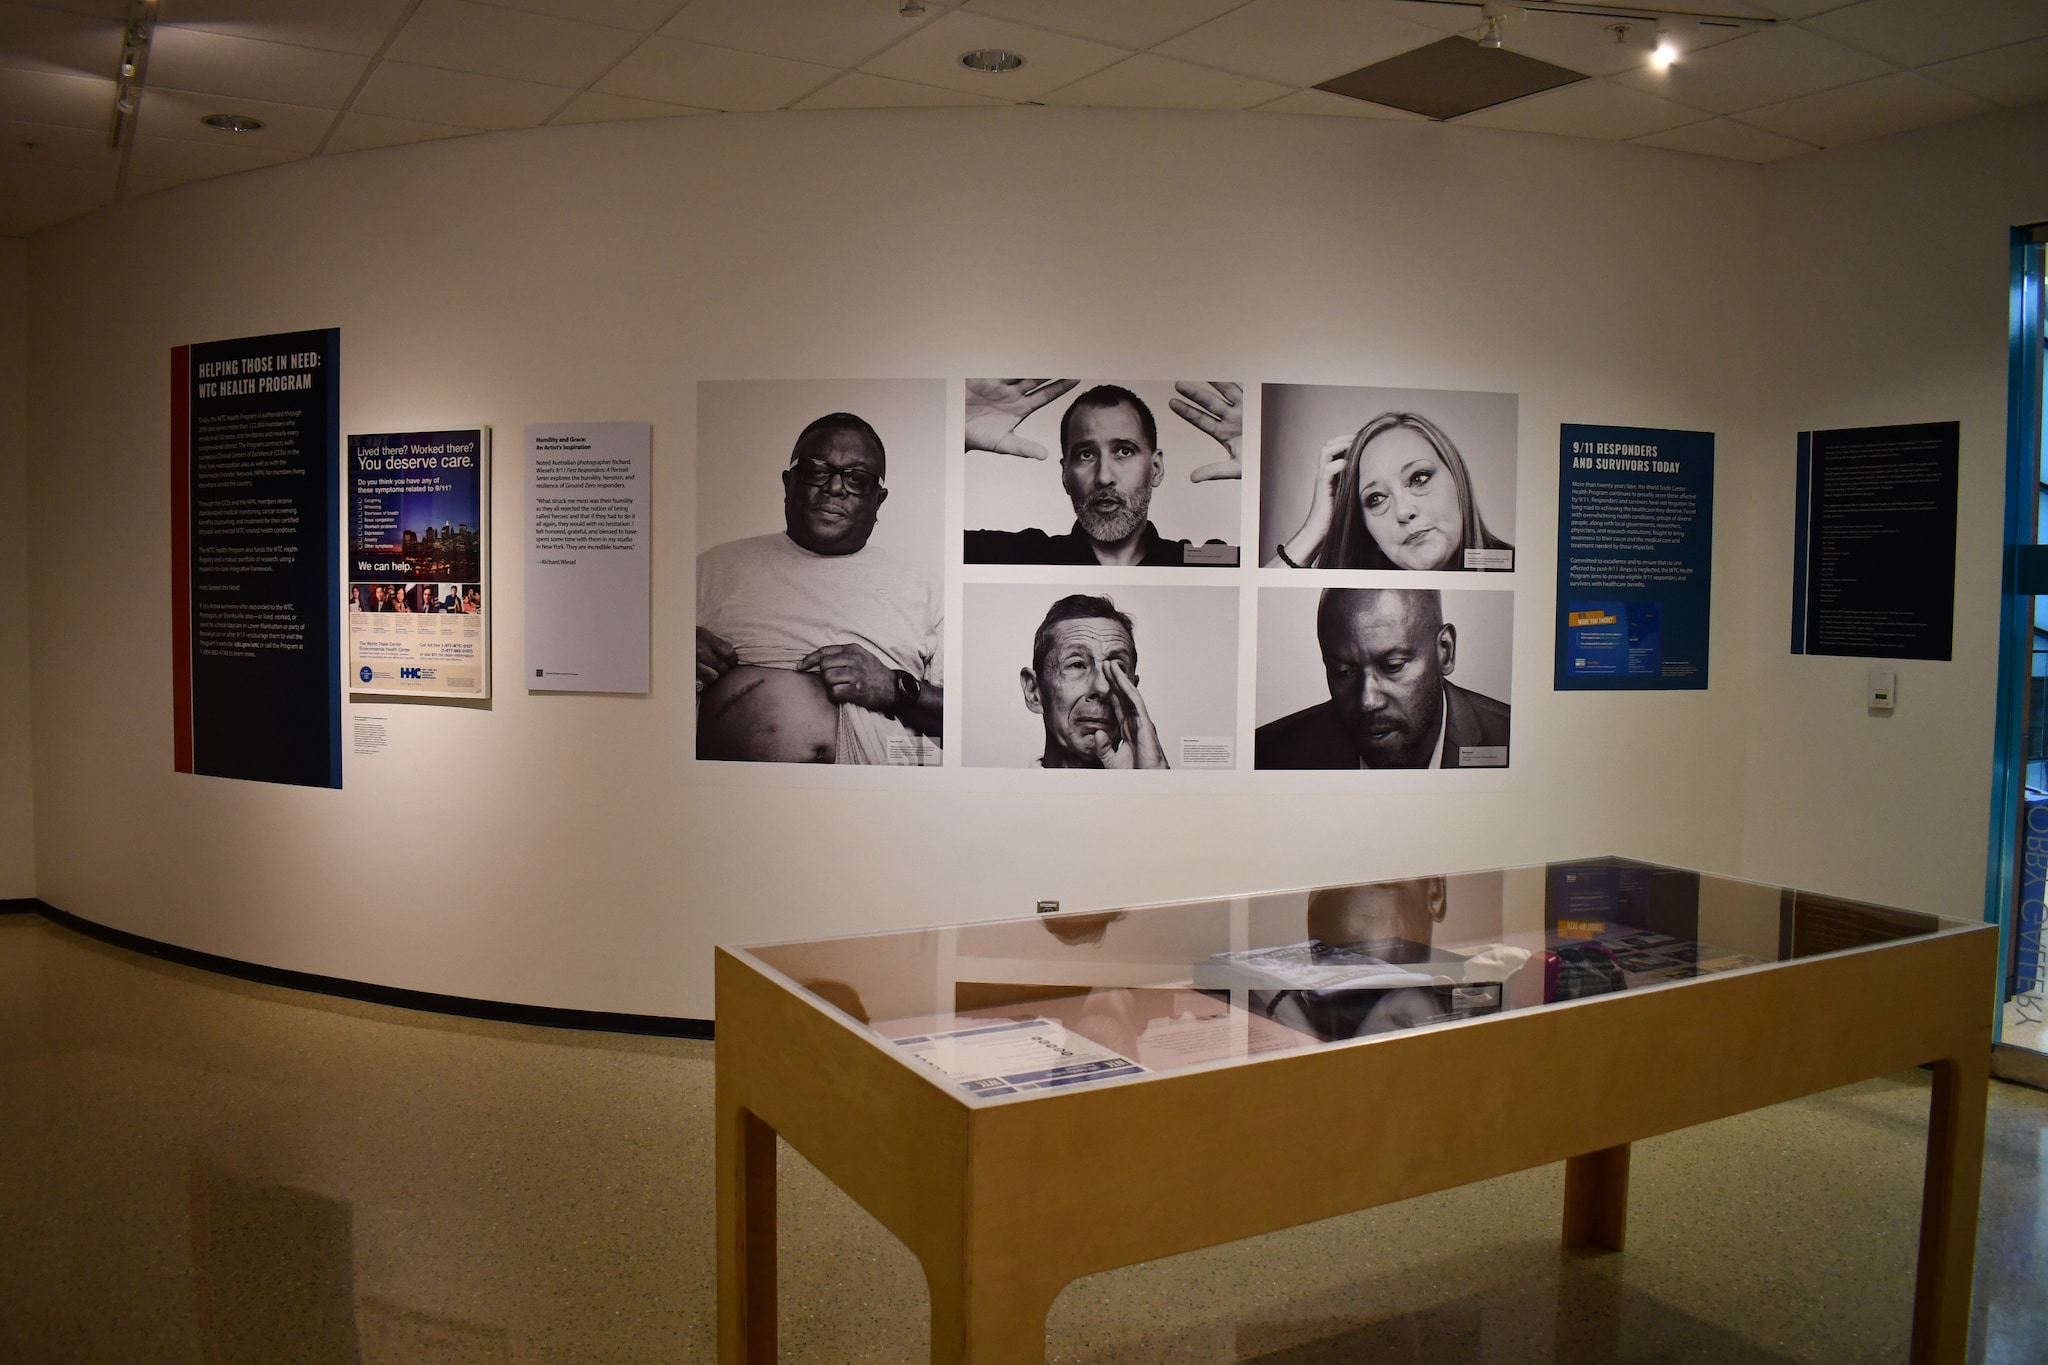 A wall displaying various artifacts and images of survivors from the Health Effects of 9/11 Exhibition.